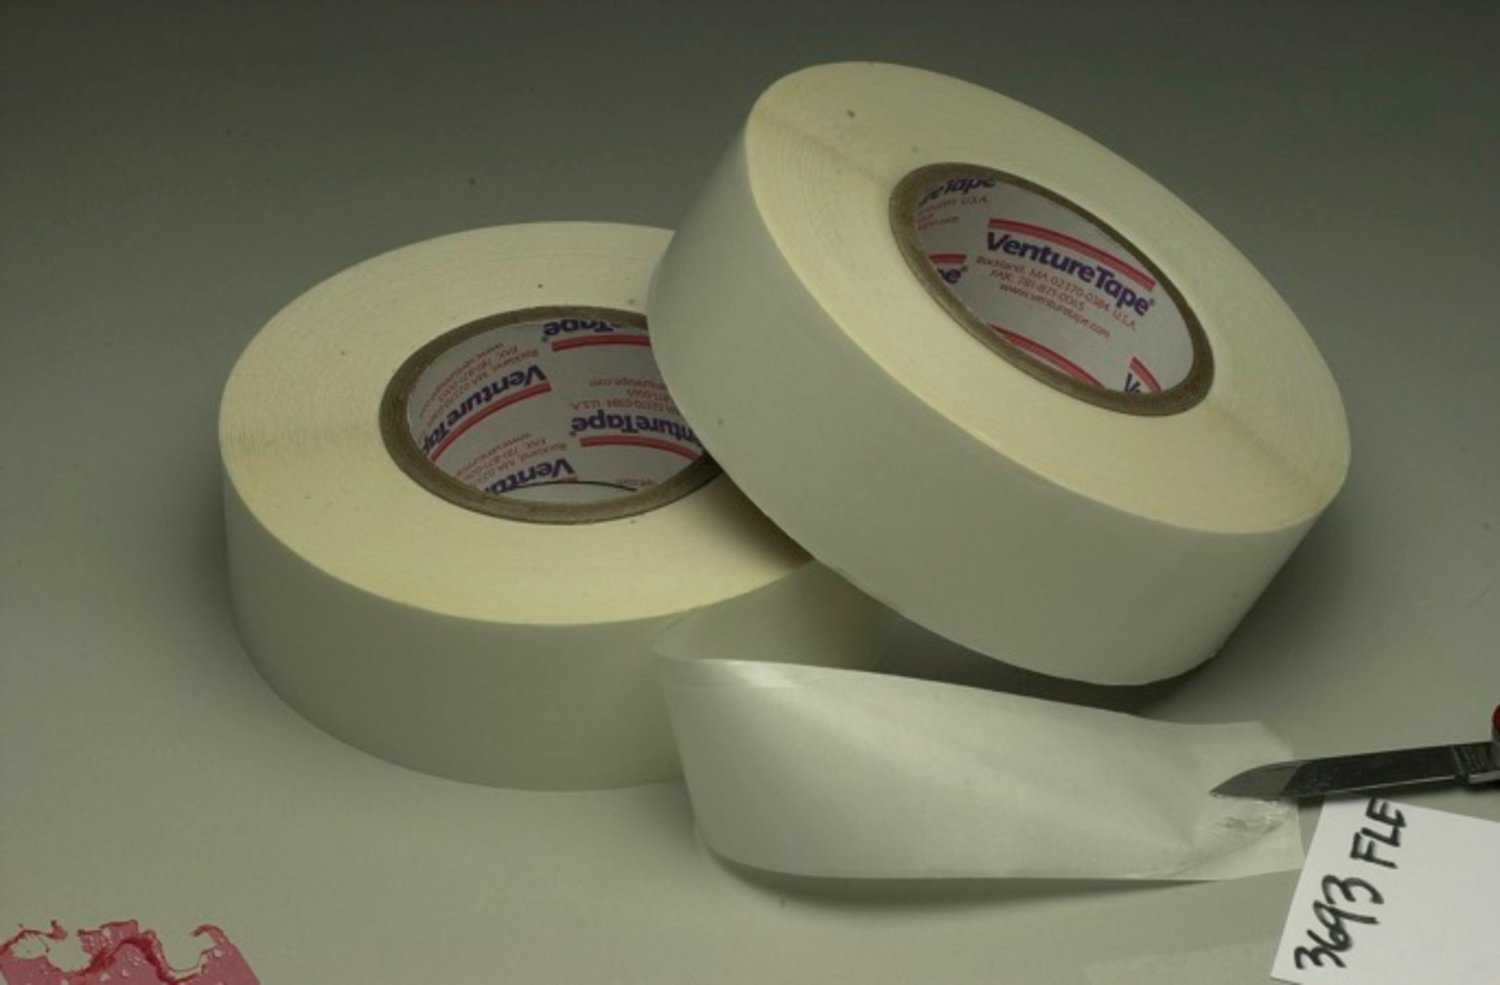 7100043940 - 3M Venture Tape Double Coated Nylon Tape 3693FLE, Left Hand, 1.5 in x 200 yd, 8 Rolls/Case